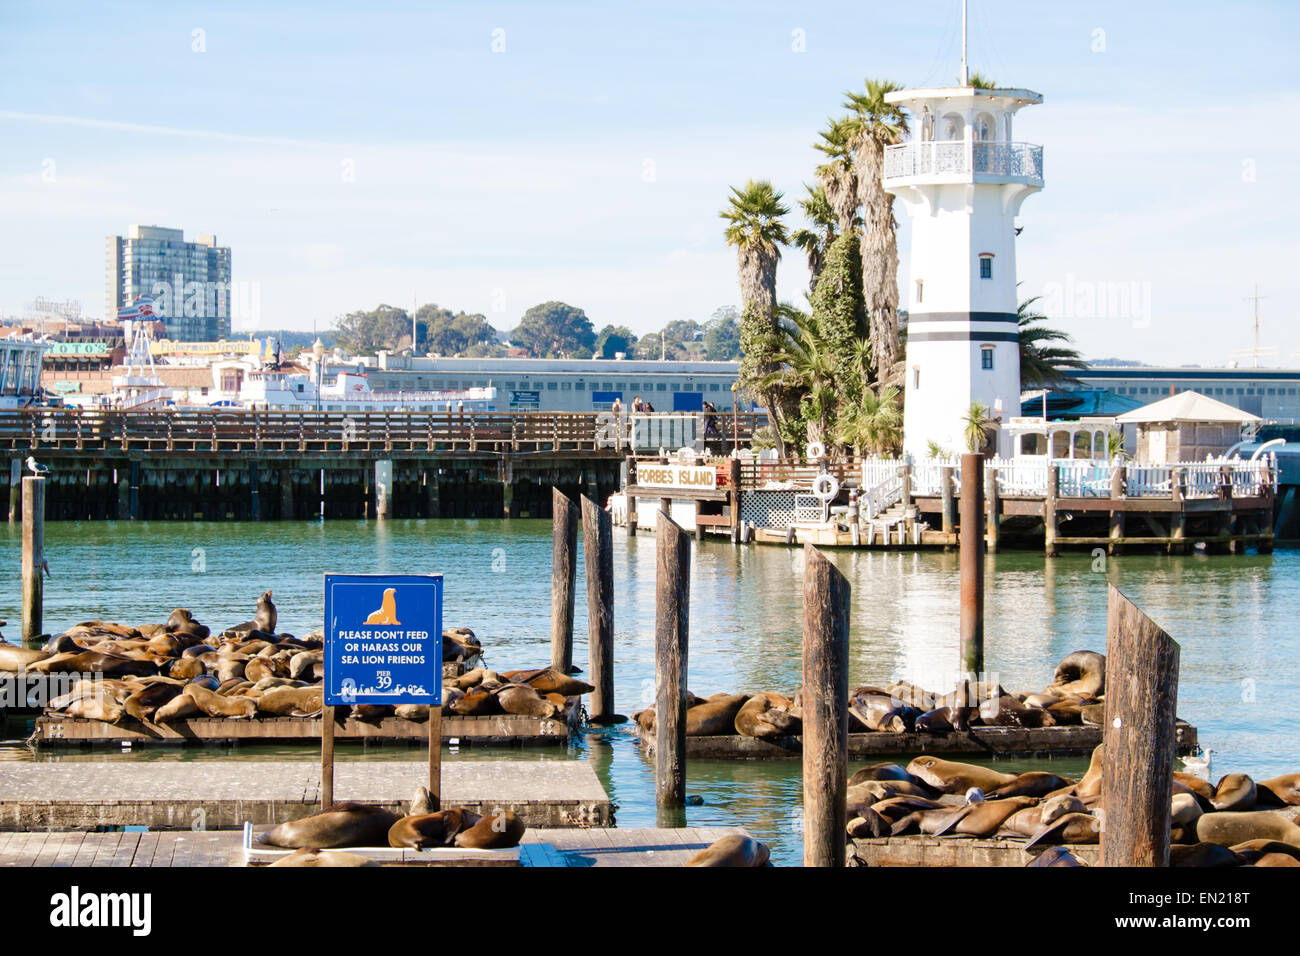 Seals warming in the sun on barge boards at Pier 39 San Francisco California Stock Photo